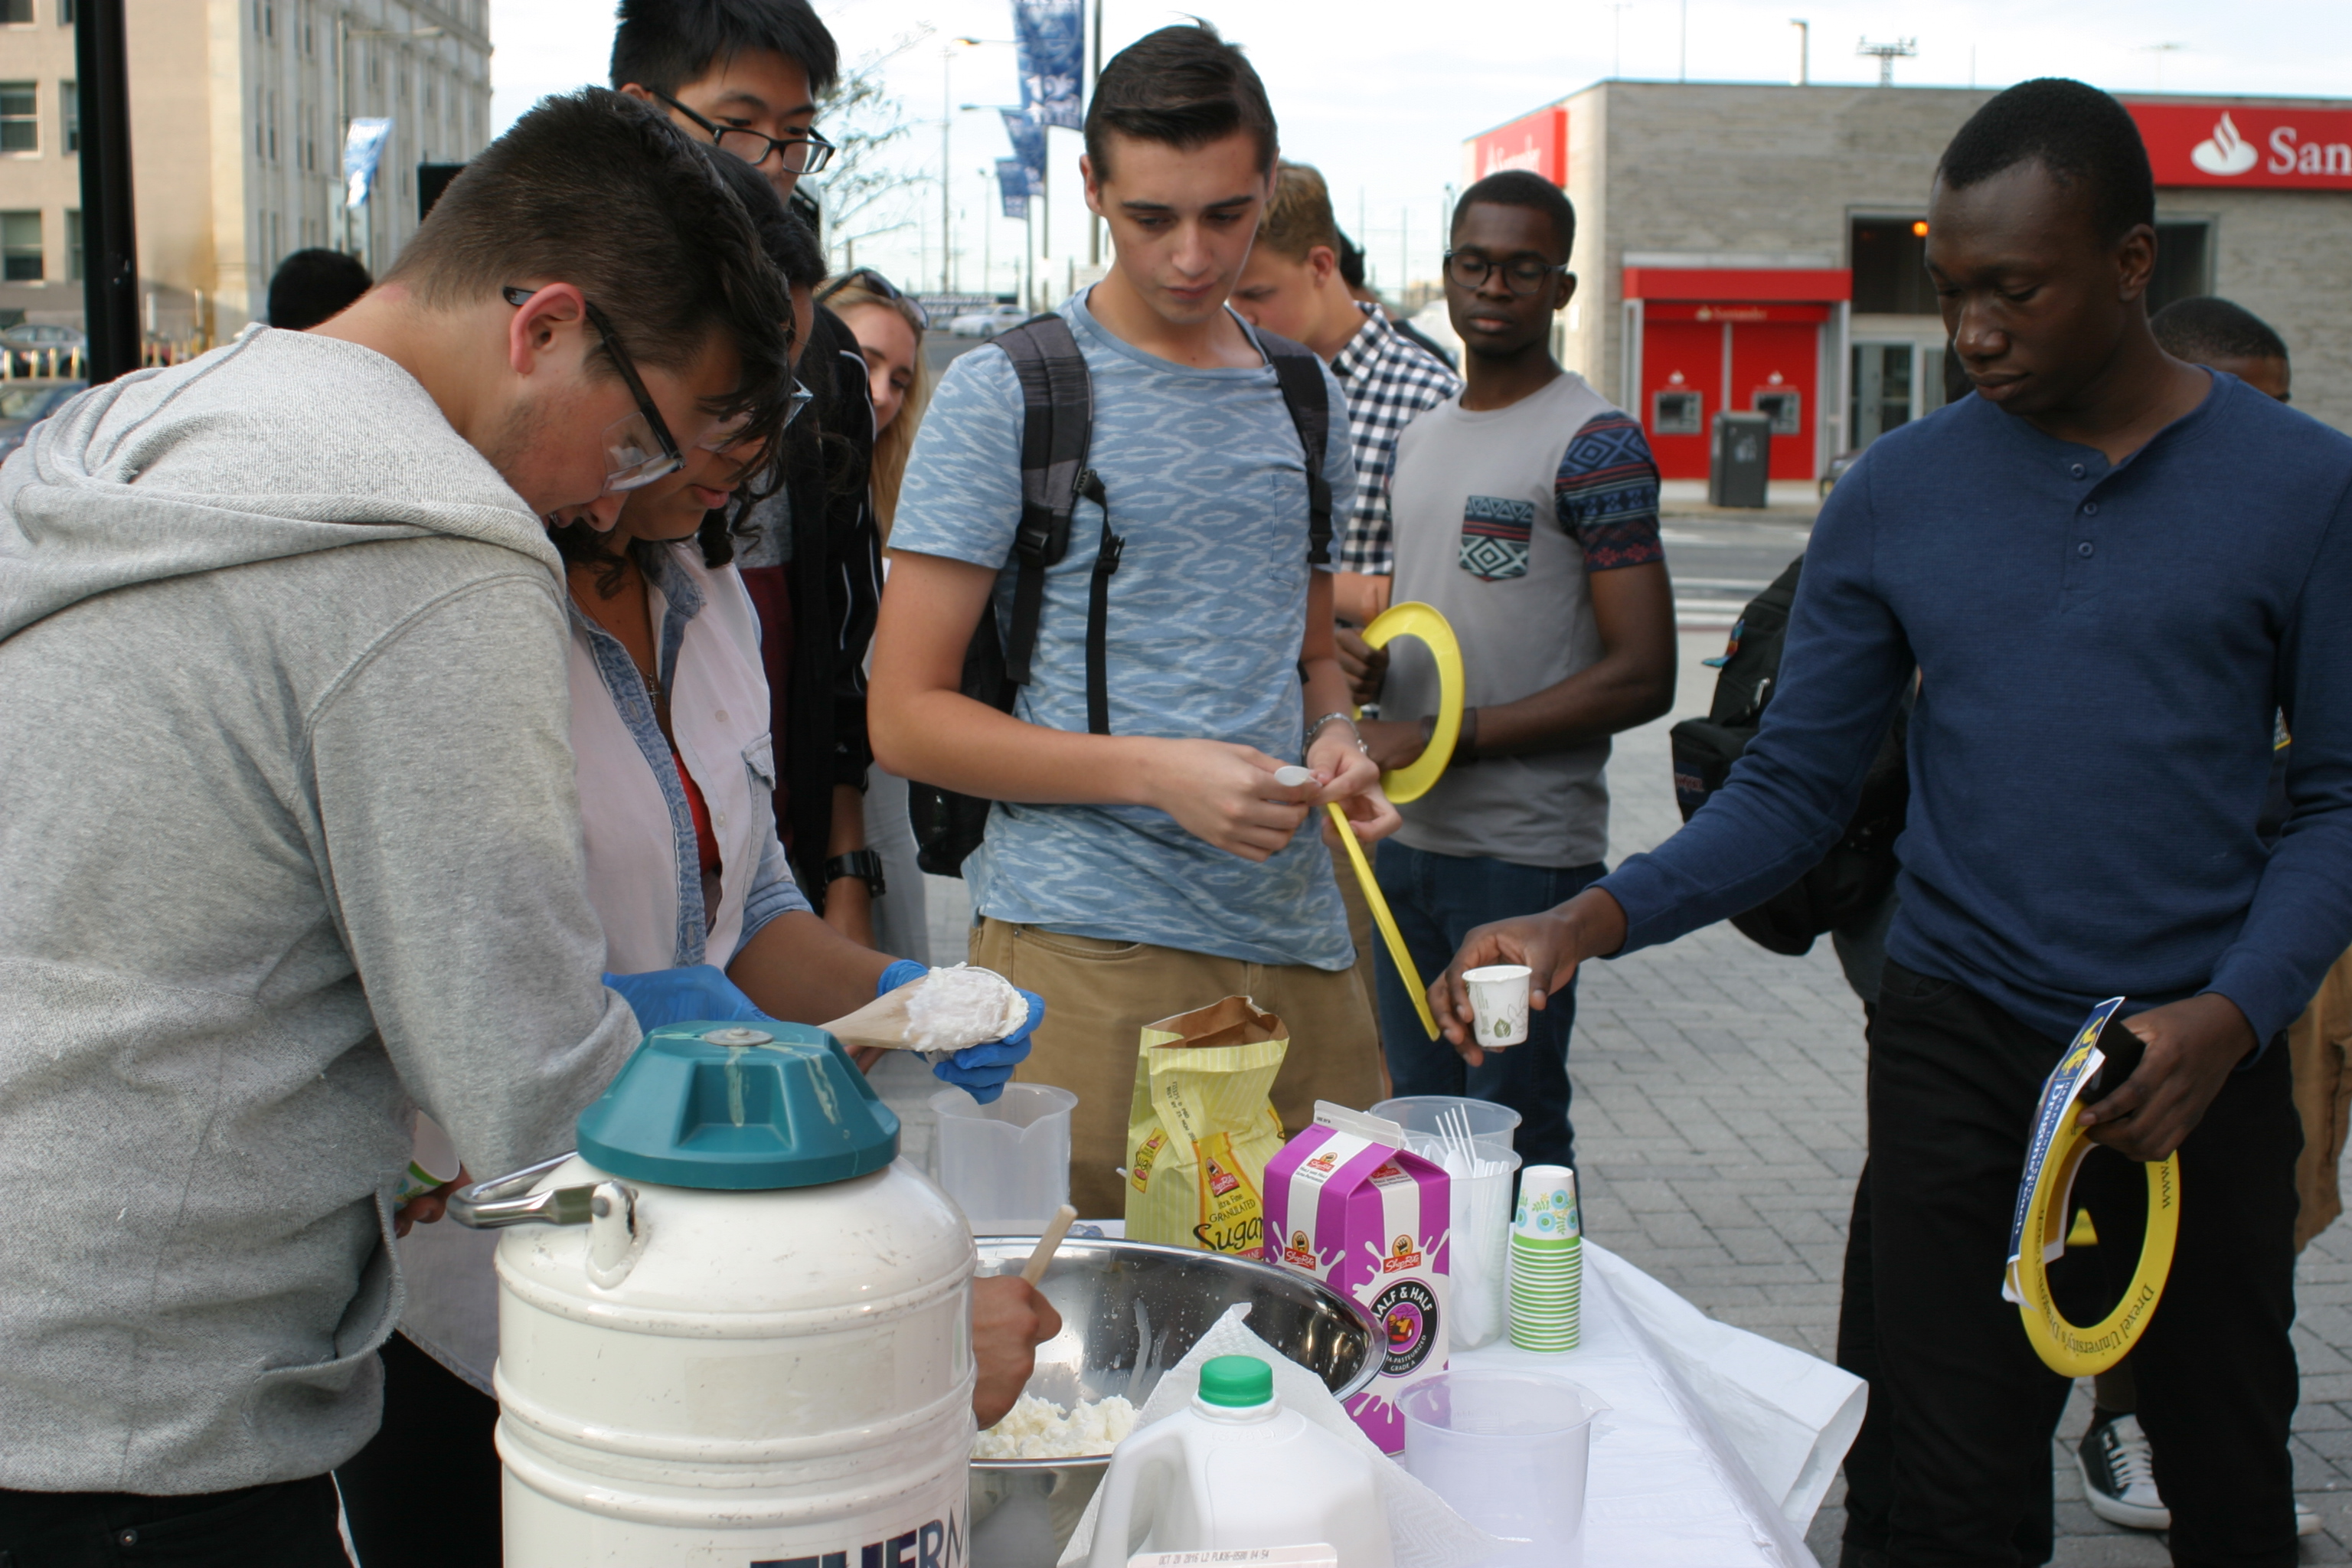 DragonsTeach students conduct experiment on campus